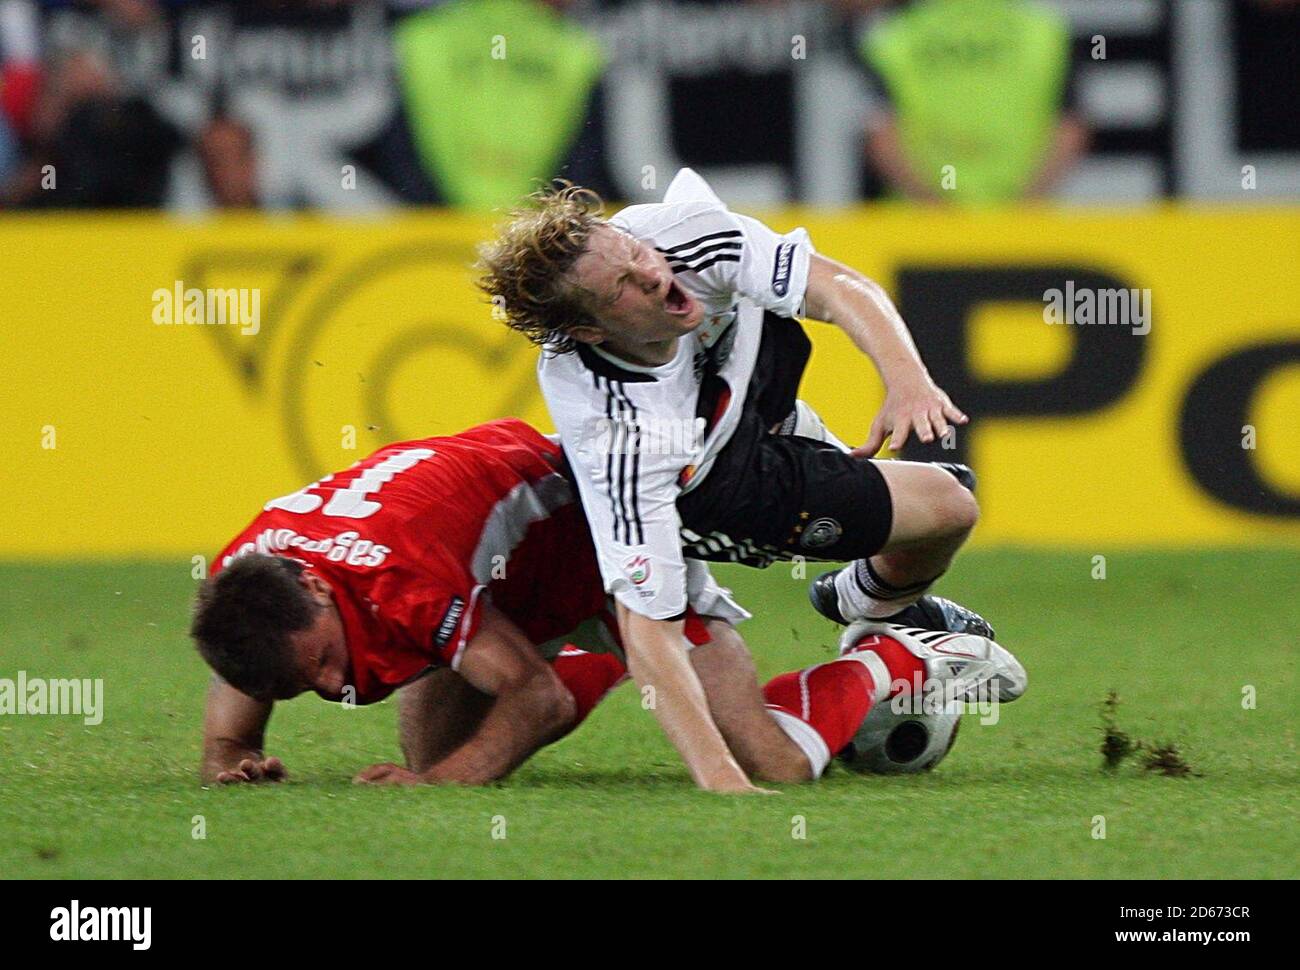 Germany's Marcell Jansen (right) goes to ground after a challenge by Poland's Marek Saganowski. Stock Photo